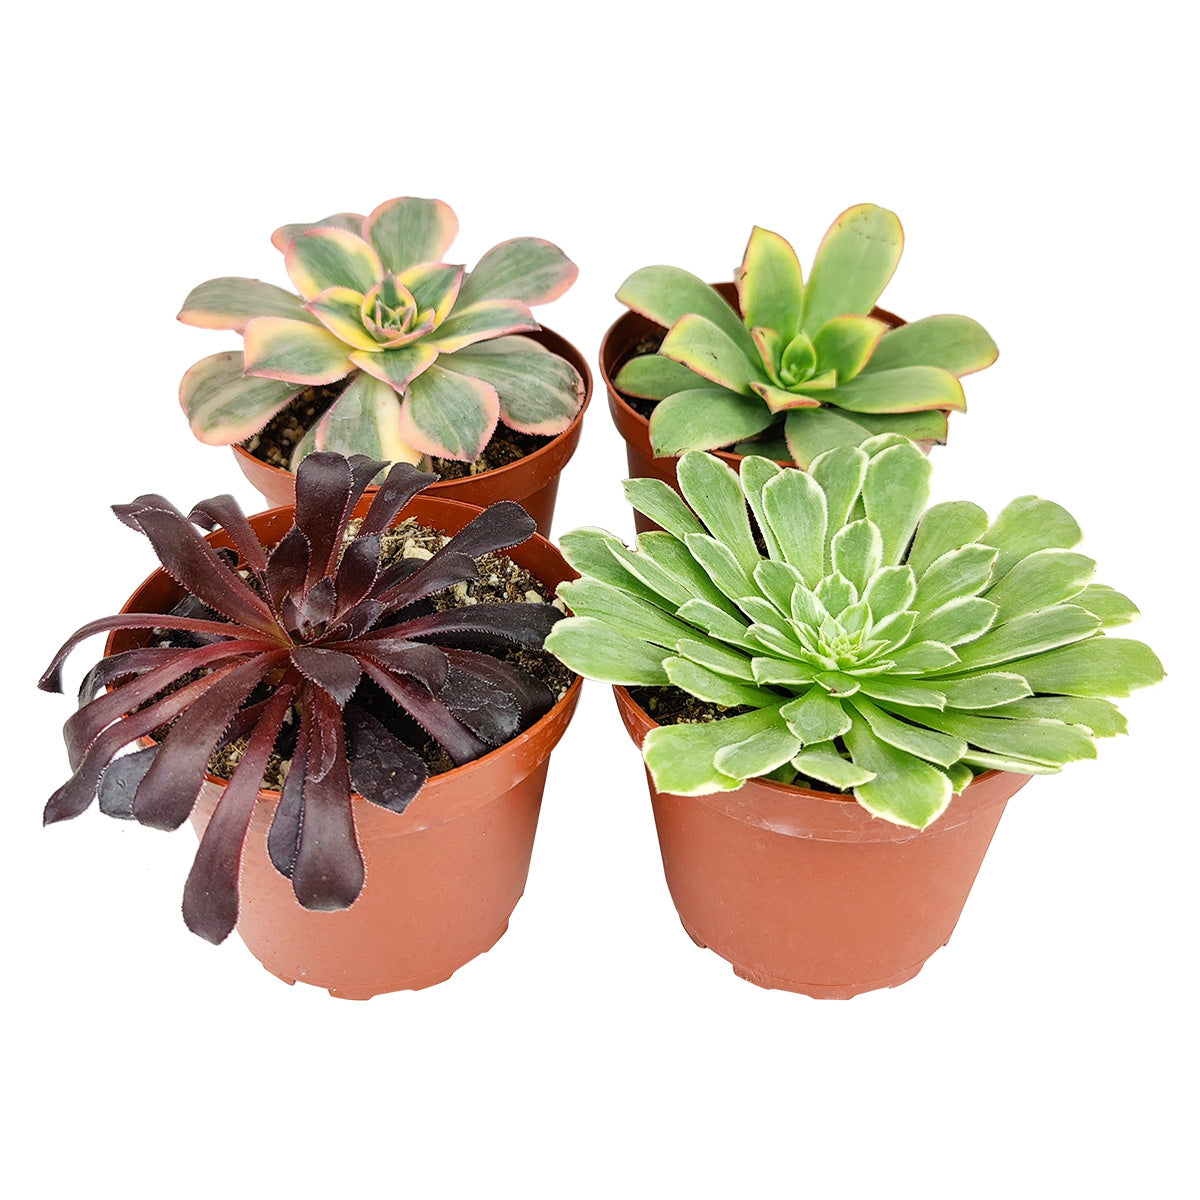 Live Aeonium Assorted Pack for sale, A Variety of Healthy Live Aeonium Succulent Plant, aeonium, aeonium succulent, aeonium types, succulent aeonium, buy succulents online, Where to buy succulents for your wedding, Rosette shaped succulent assorted pack, Succulent assorted pack perfect for weddings, Aeonium rosette succulent plant pefect for wedding